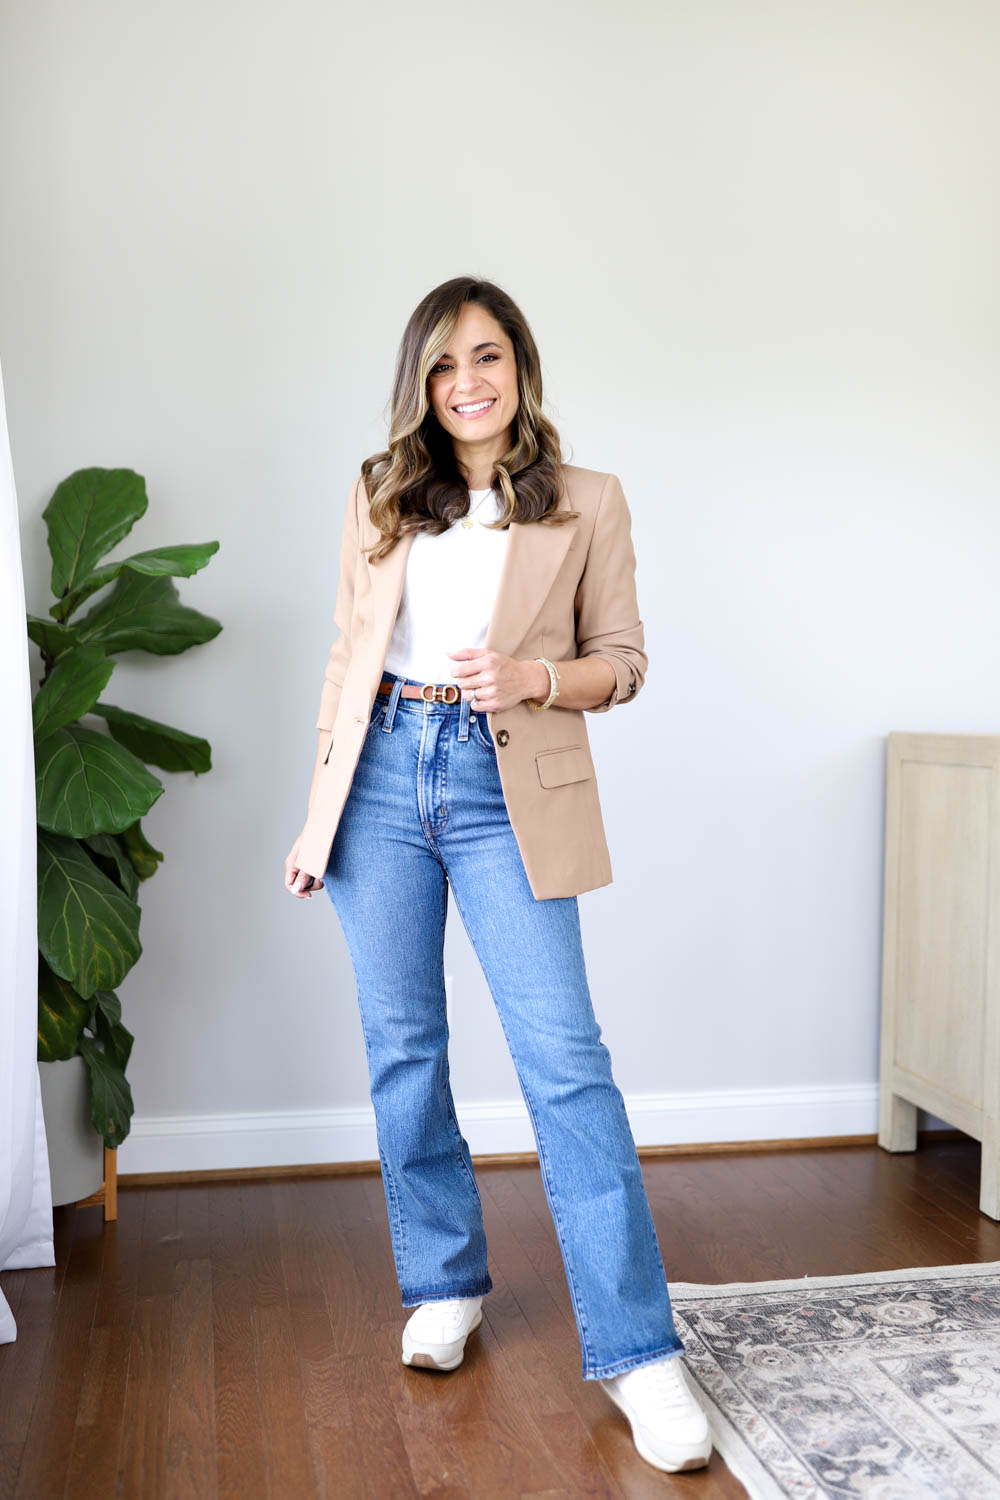 Outfits for Work with Sneakers - Pumps & Push Ups